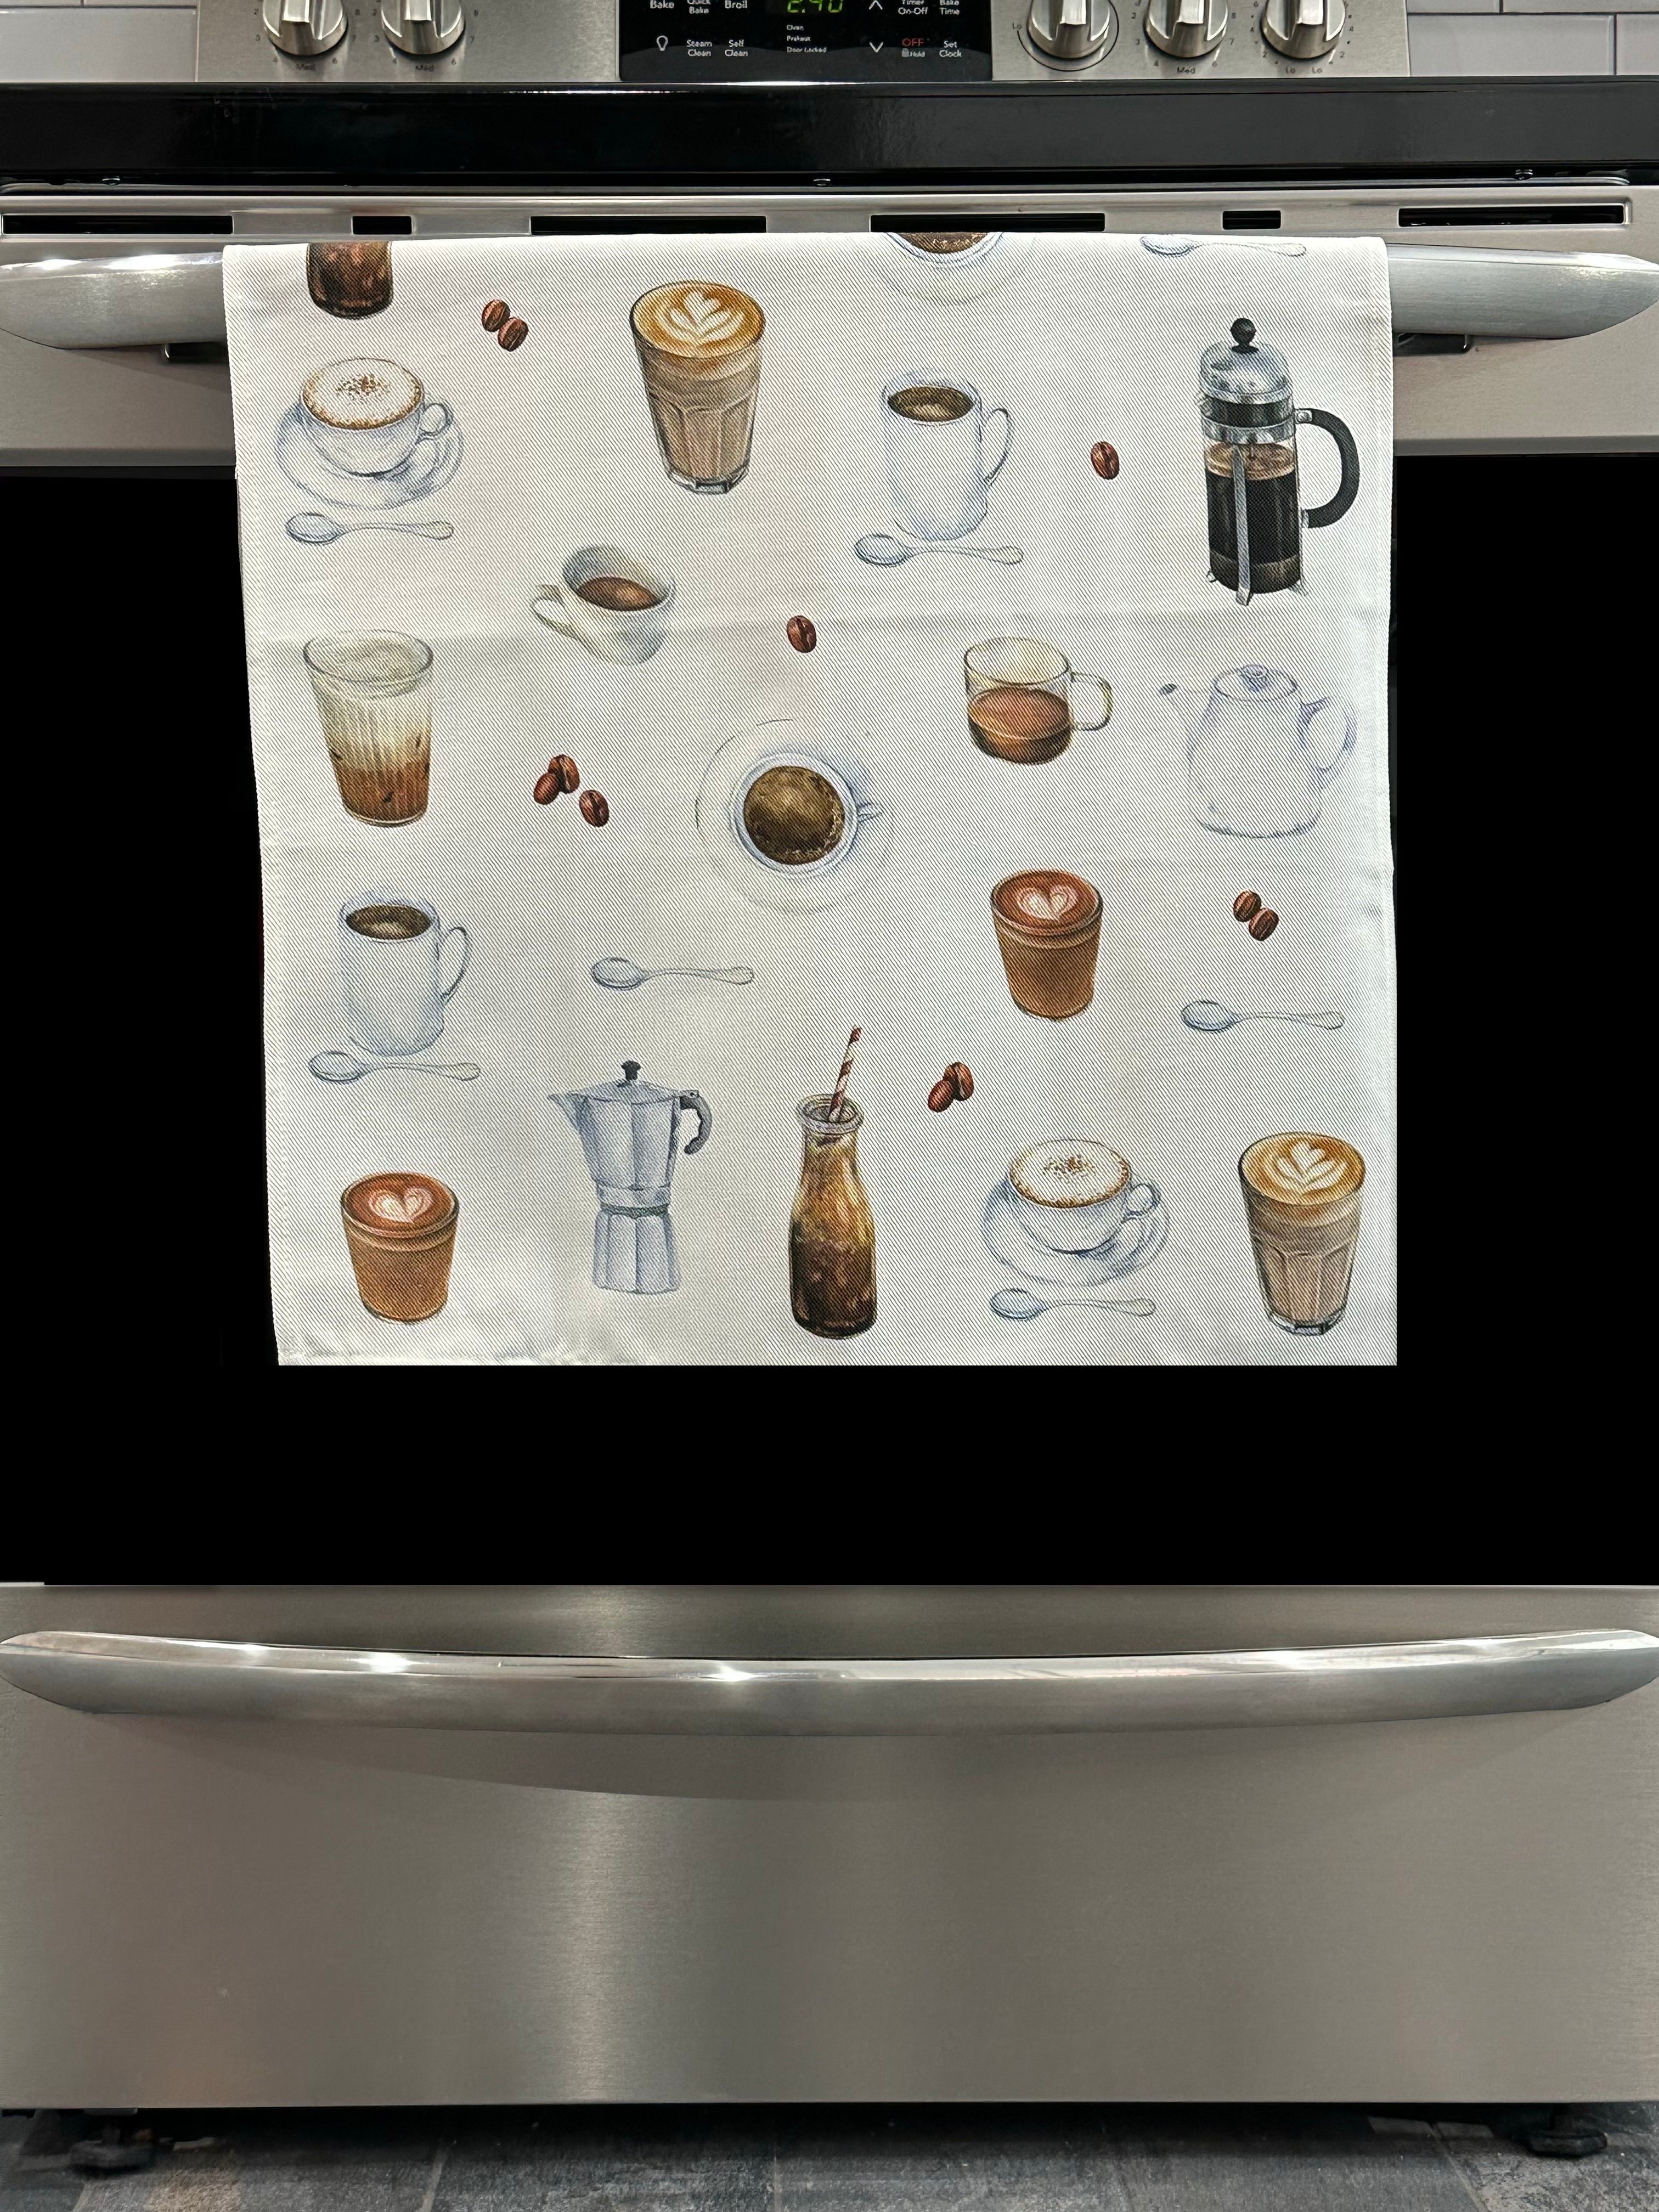 Kitchen Towel featuring a coffee design. Pictured here hanging on a stove.